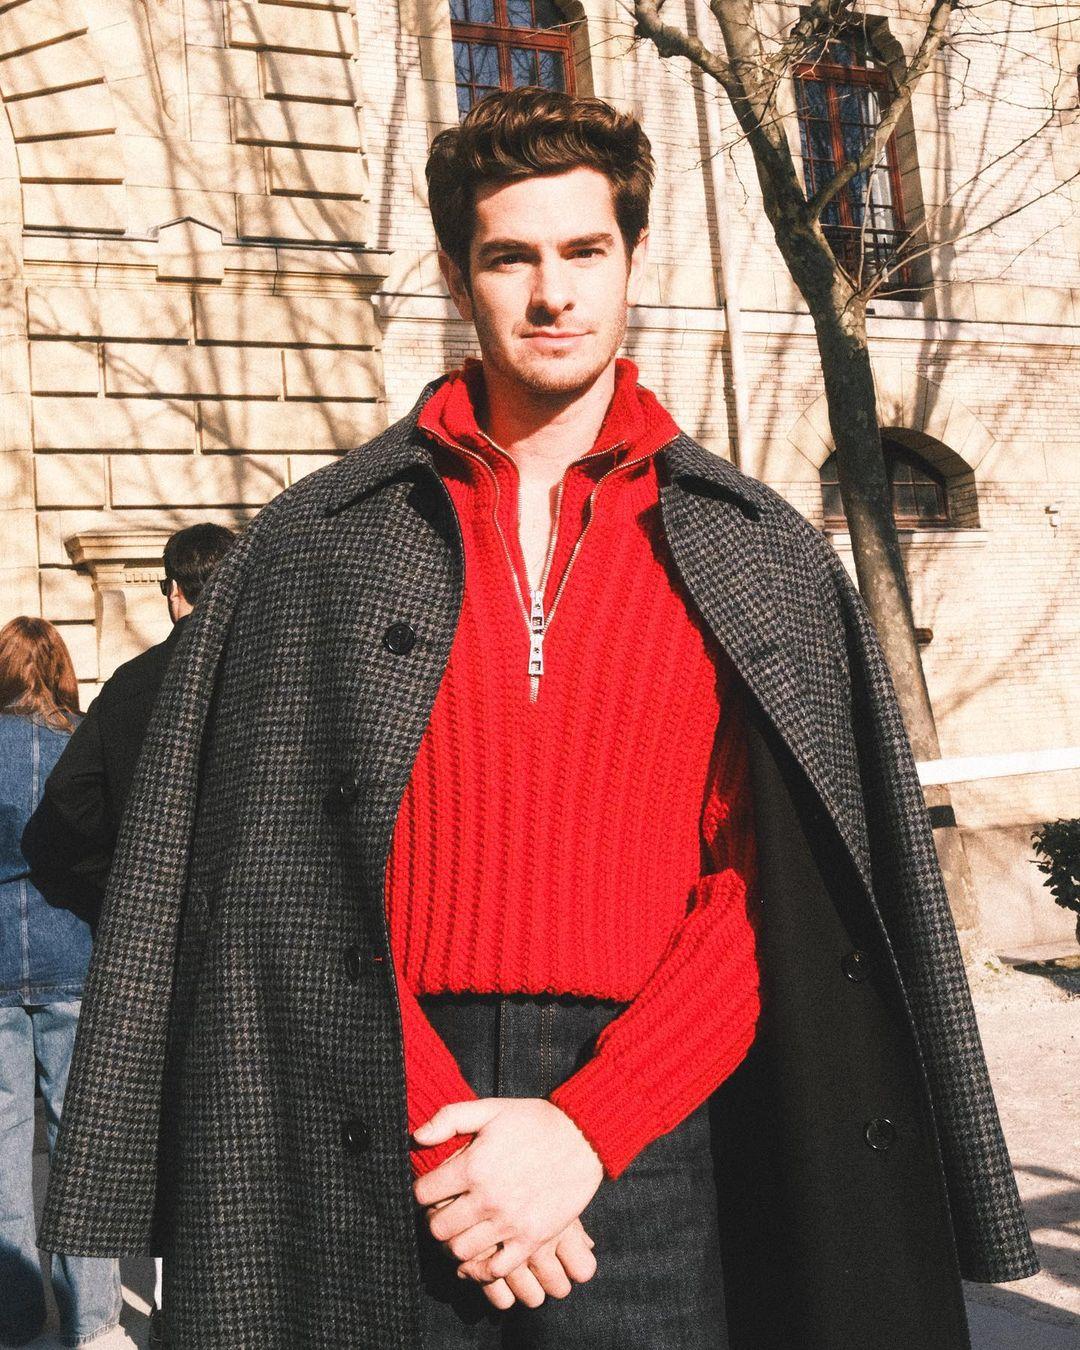 At Paris Fashion Week, Andrew Garfield caught attention with his sharp sense of style. He rocked a stylish outfit, combining a striking red shirt with tailored grey trousers. To add a touch of sophistication, he threw on a sleek grey overcoat.